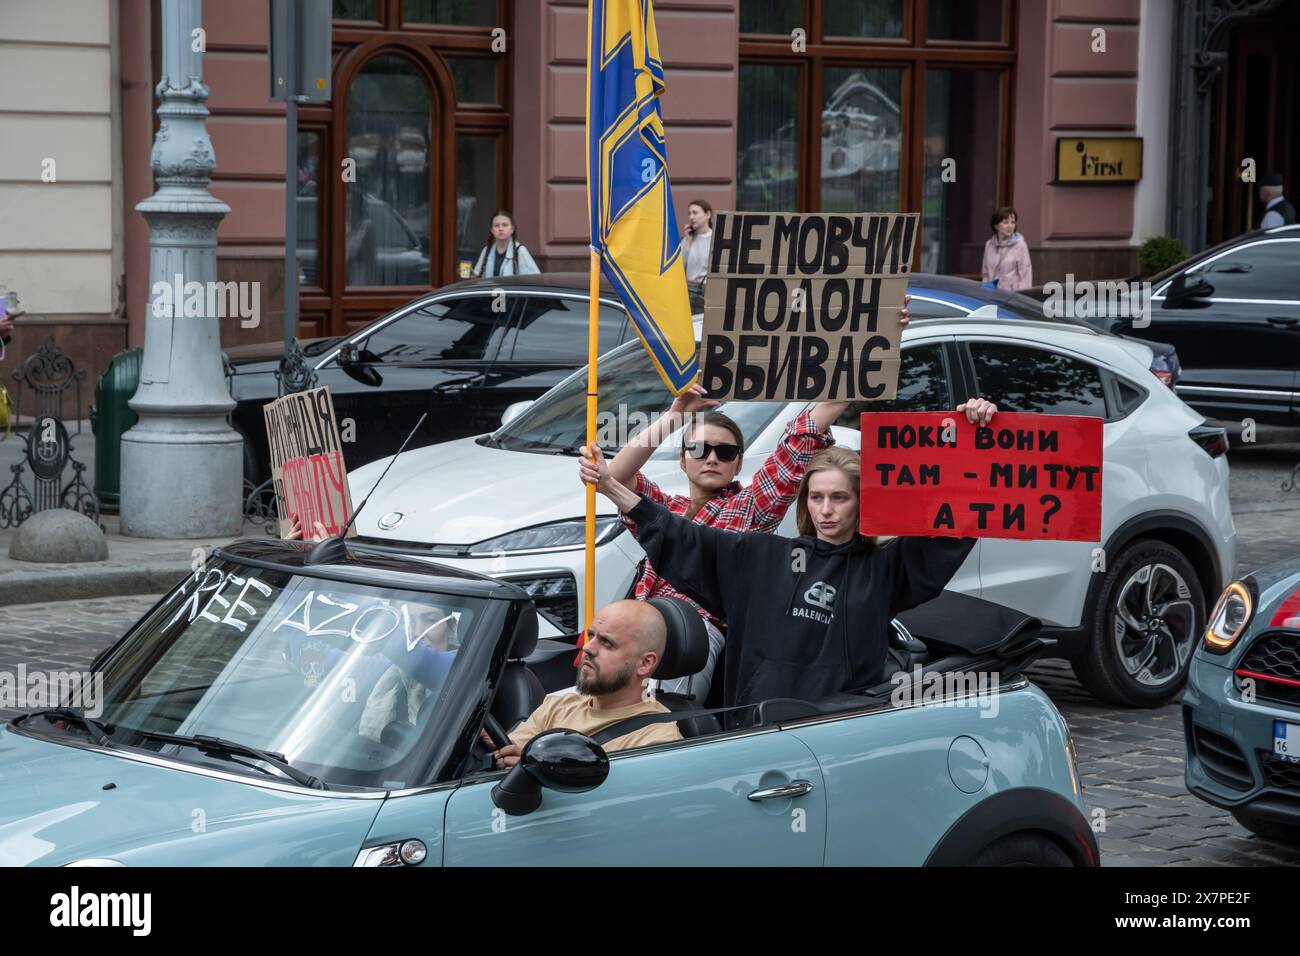 May 18, 2024, Lviv, Ukraine: People with banners drive in cars during the protest in the center of Lviv. Relatives and friends of captured defenders of Mariupol, holding banners and flags, participated in the ''Don't be silent. Capture kills. Two years of captivity'' protest in Lviv. The event, organized by the Association of Families of Defenders of Azovstal, commemorated the anniversary of the captivity of Ukrainian defenders from the Azovstal plant. On May 20, 2022, these defenders left the plant and were captured by the Russians. Over 2,000 Ukrainian soldiers remain in captivity under terr Stock Photo